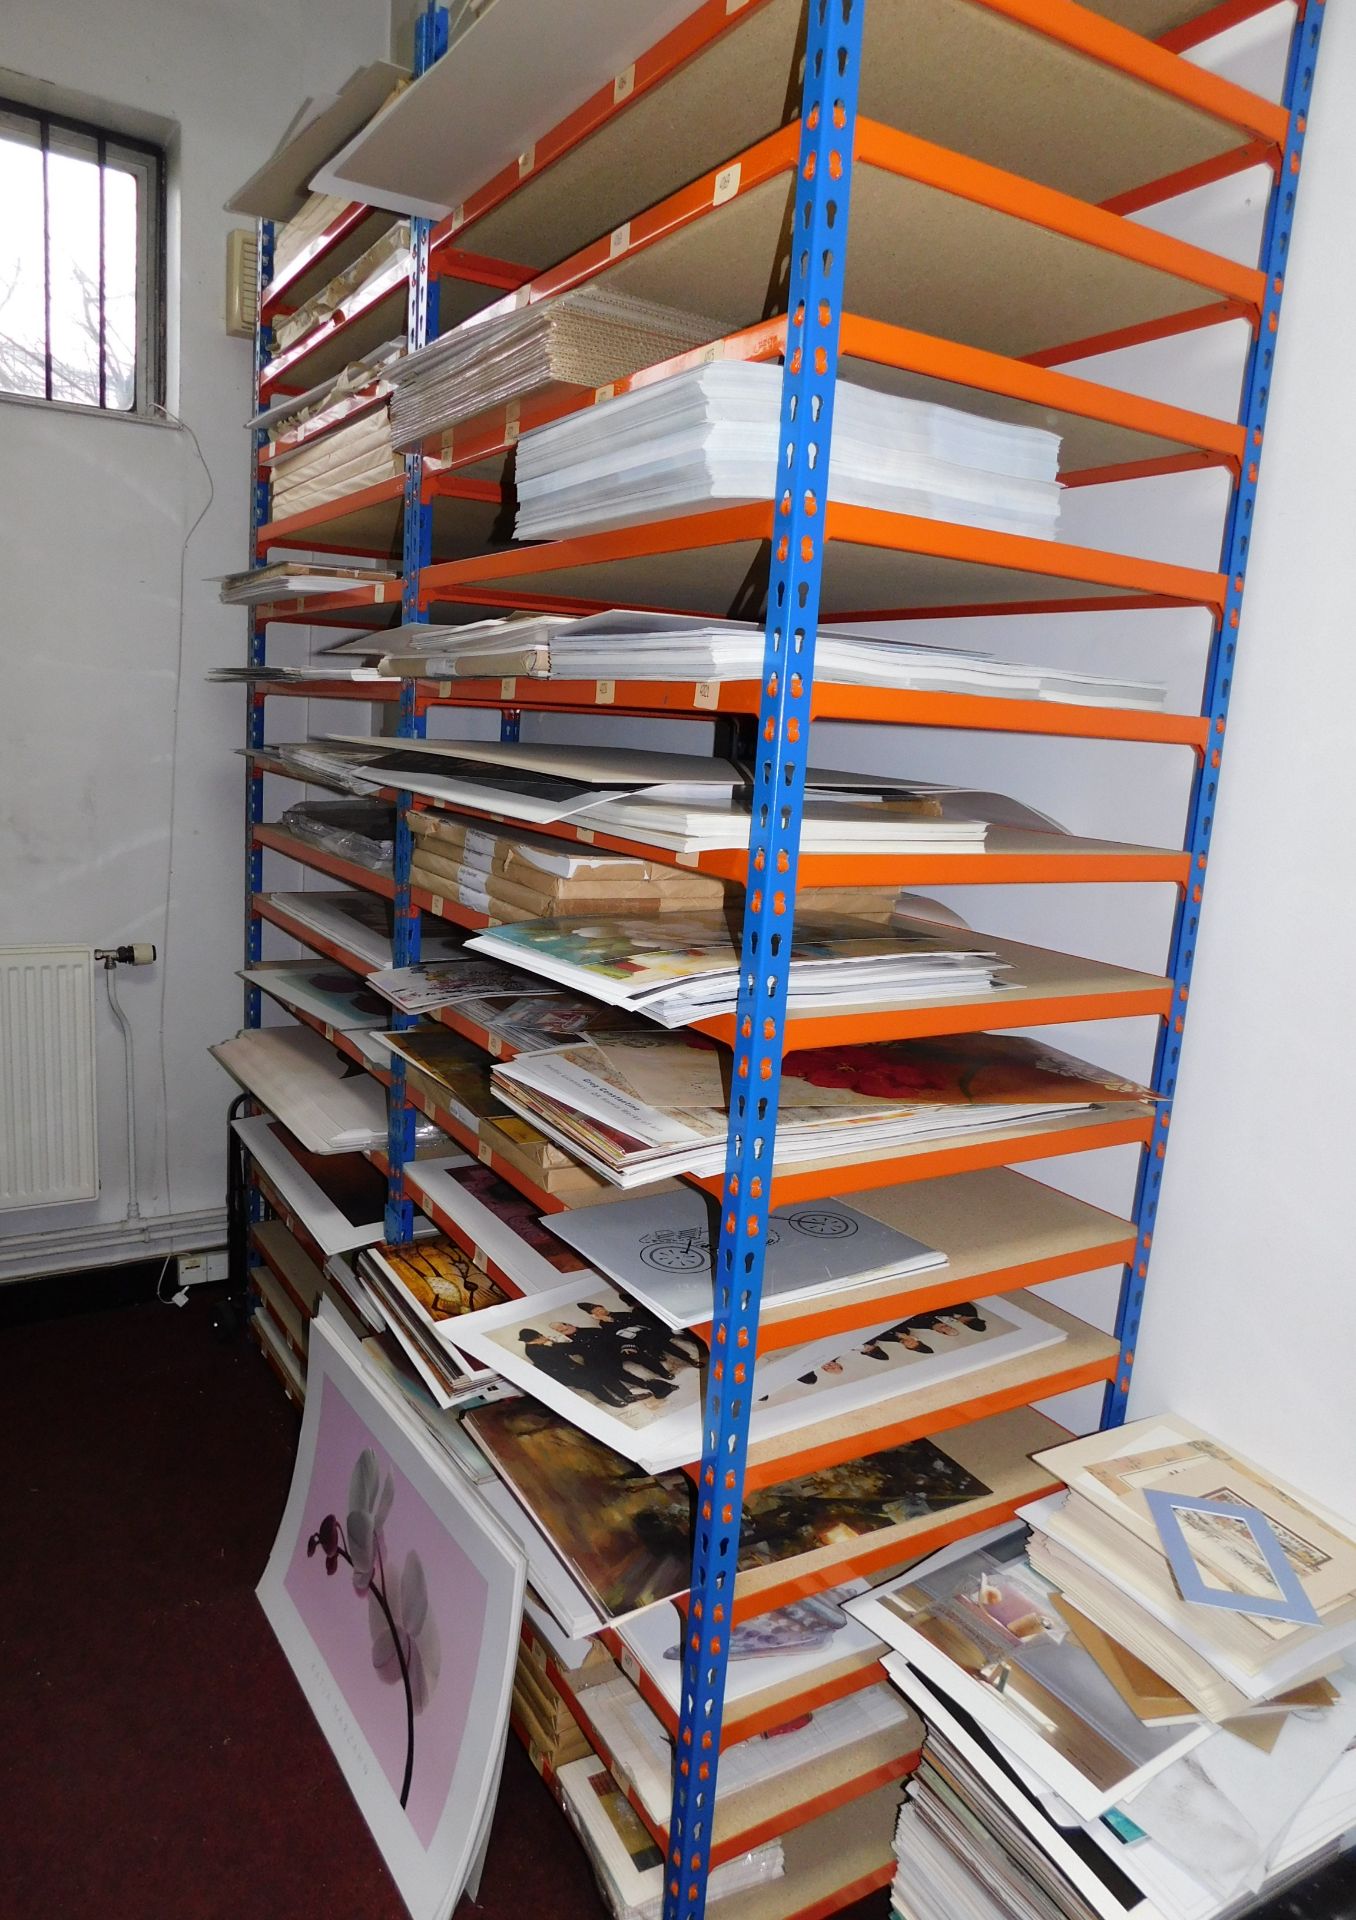 6 Bays of Multi-Tiered Shelving (Collection – Thursday 31st May) - Image 2 of 3